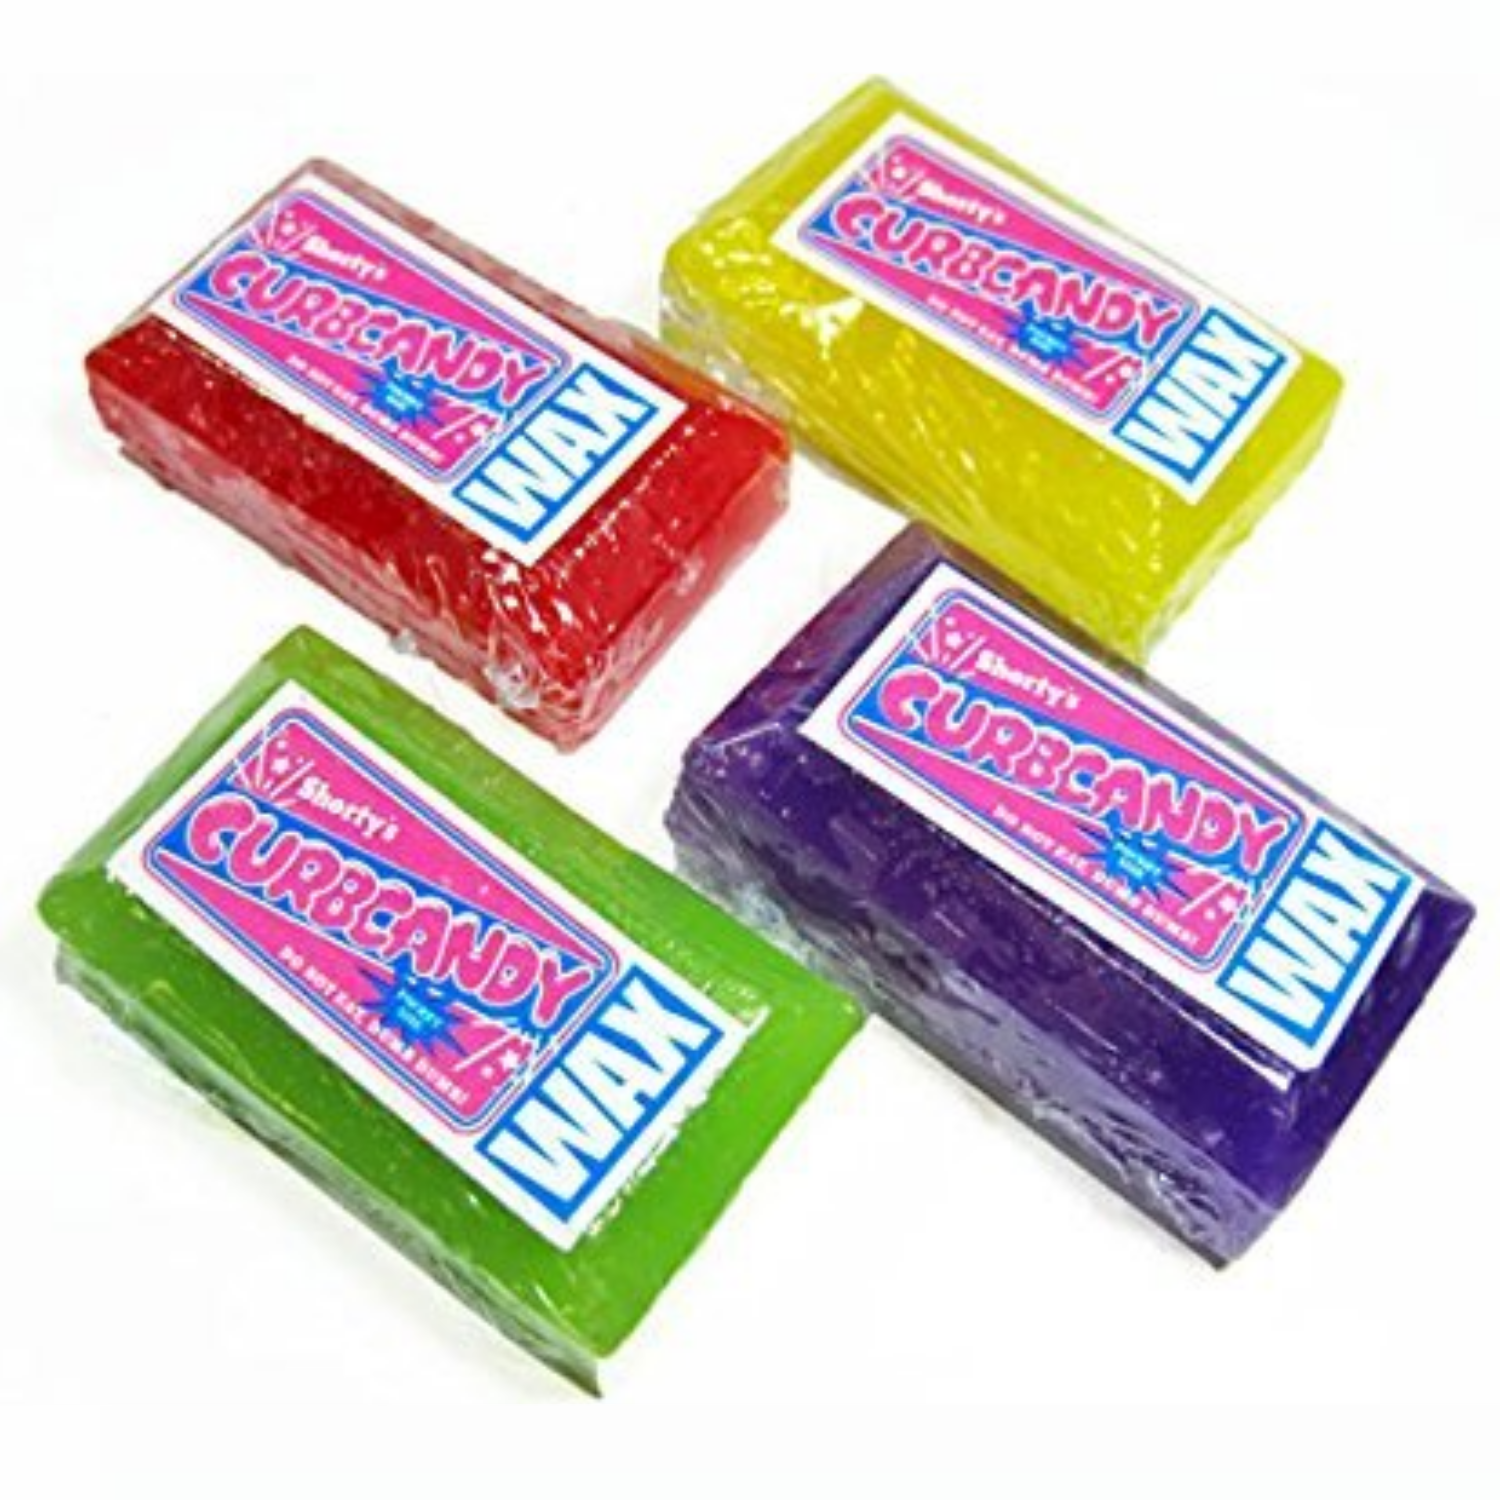 Shorty's Curb Candy Skate Wax Pack